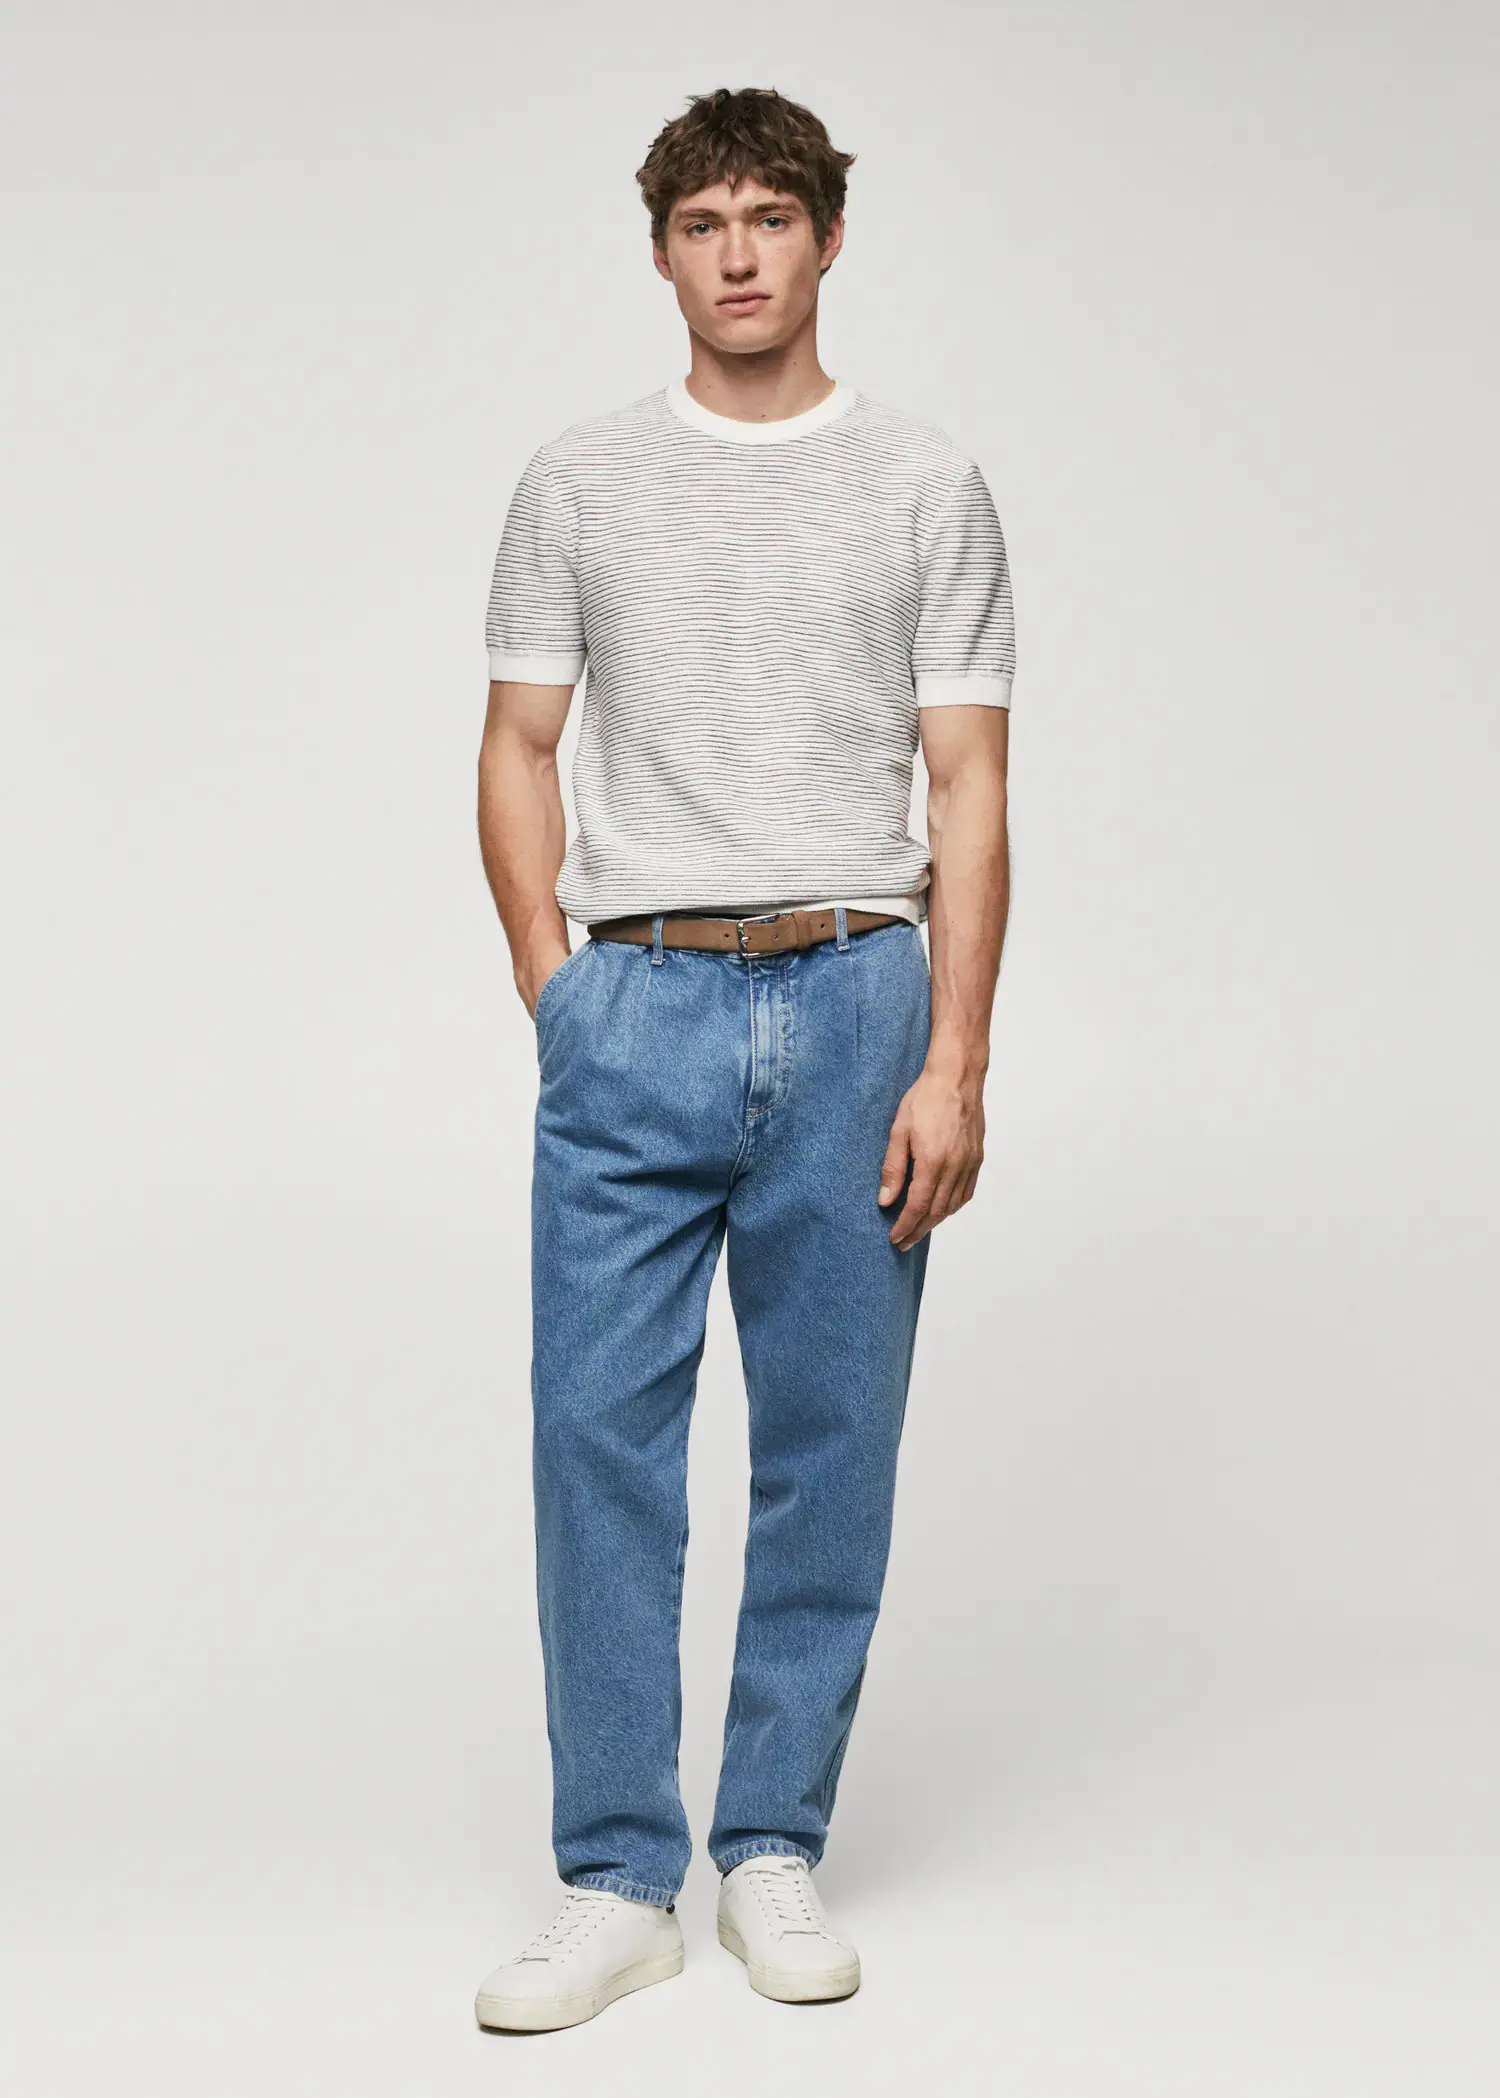 Mango Textured striped T-shirt. a man in a white shirt and blue jeans. 